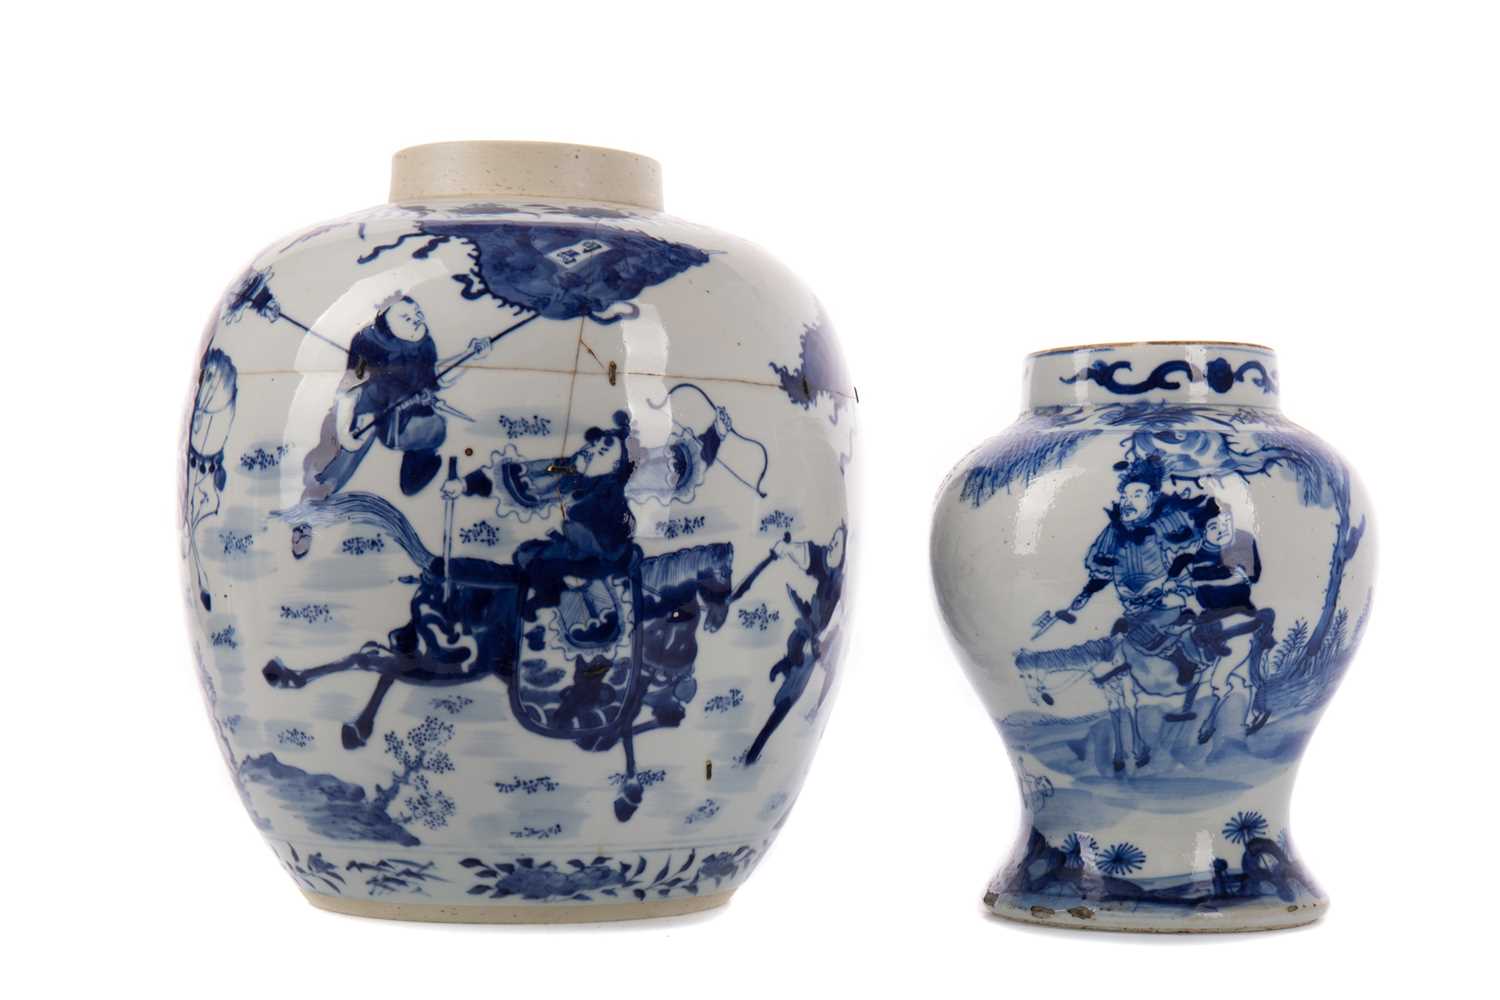 Lot 1859 - AN EARLY 19TH CENTURY CHINESE BLUE AND WHITE BALUSTER VASE AND ANOTHER